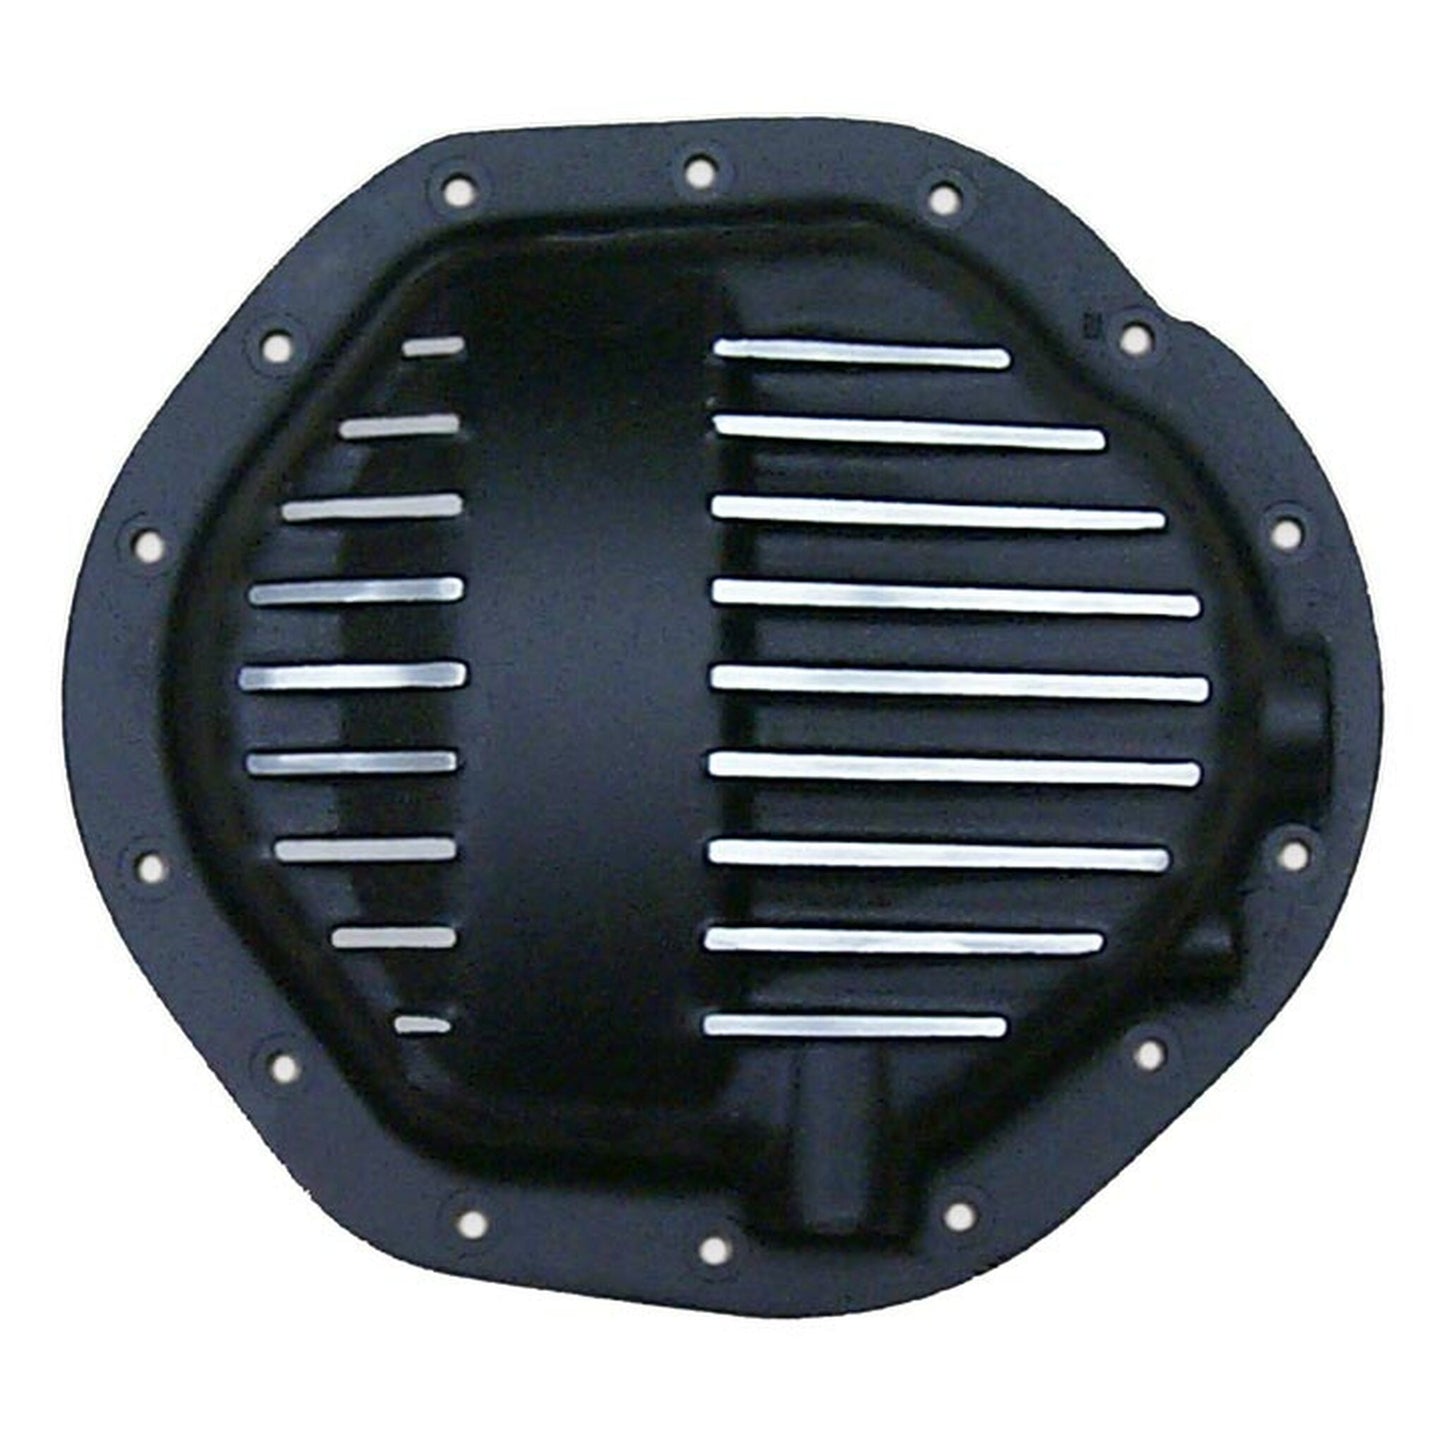 GM 9.5" Differential Cover 3.25" Depth